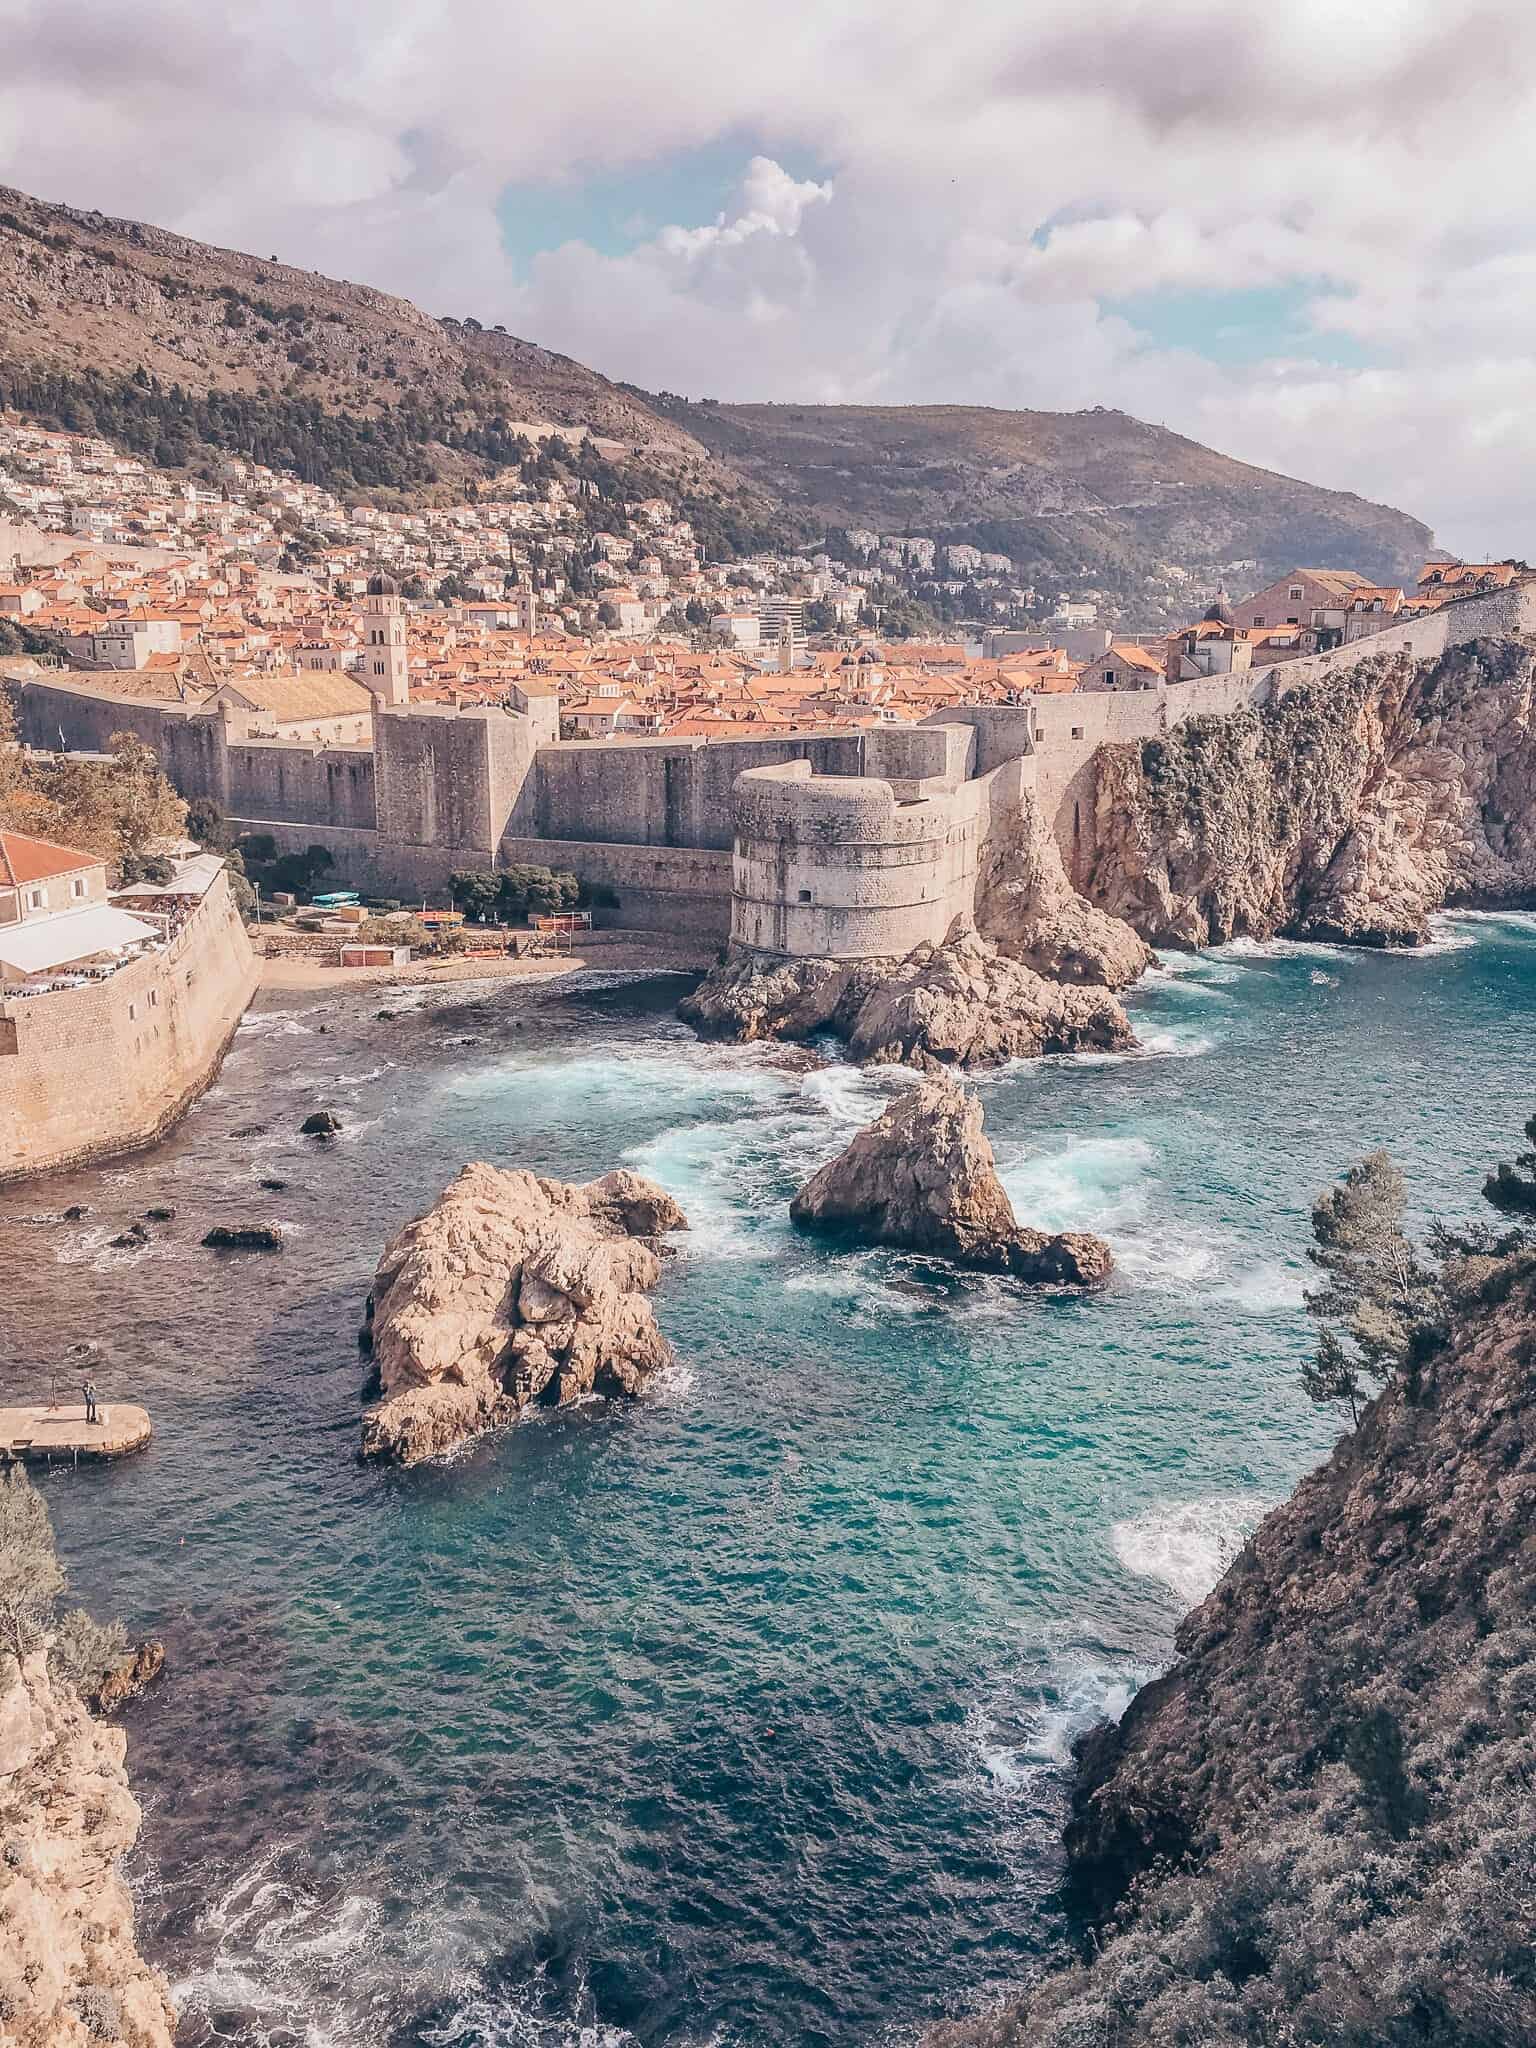 Is Dubrovnik Worth Visiting As A Solo Female?